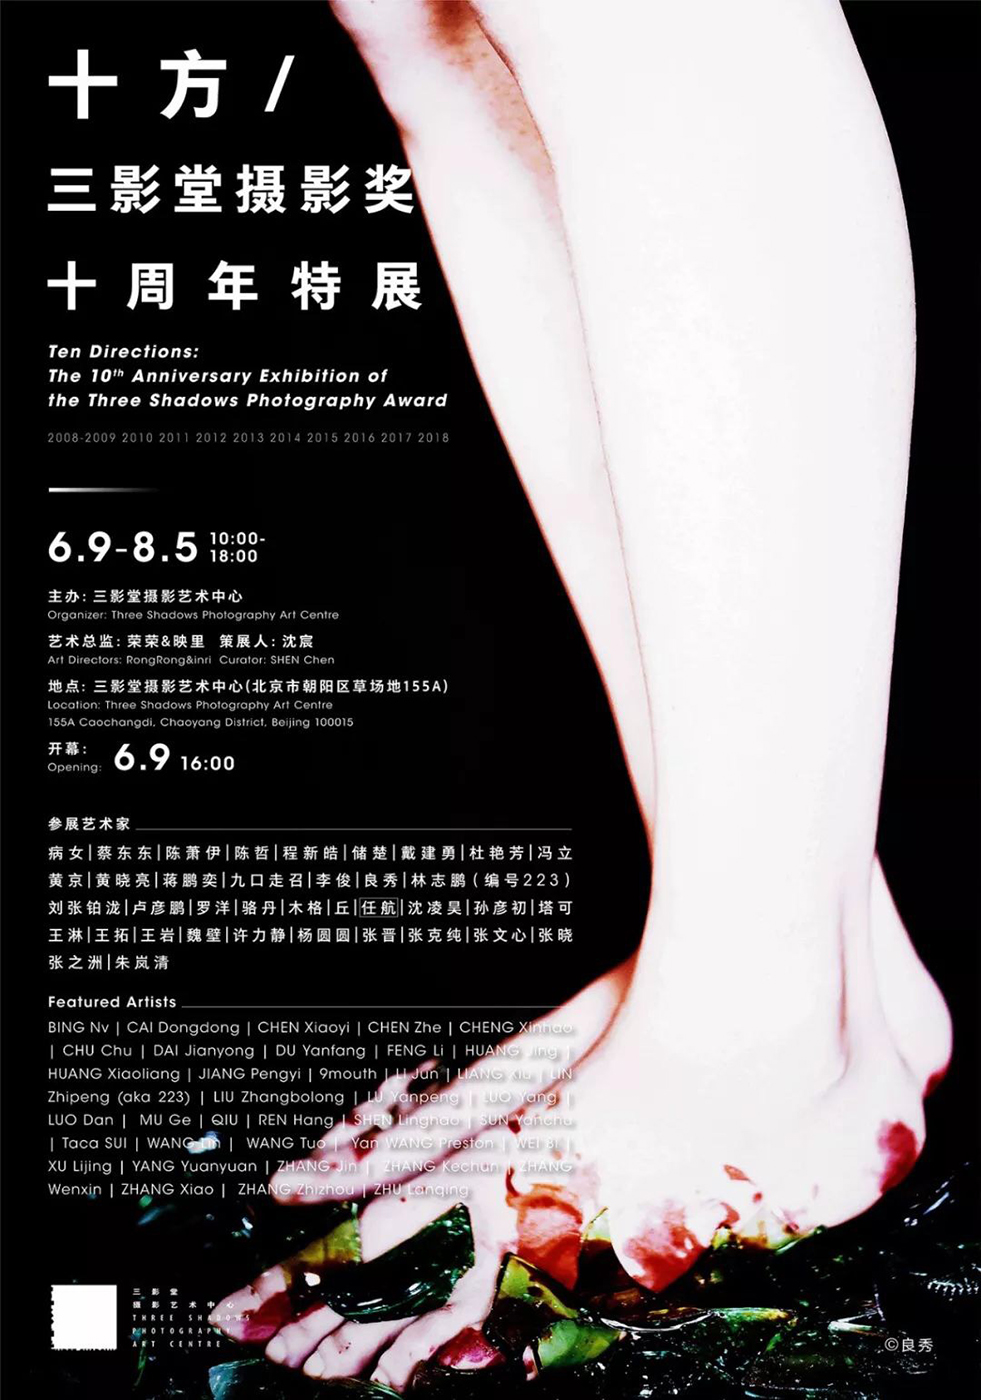 Jiang Pengyi, Ren Hang and Zhang Xiao participate in “Ten Directions: The 10th Anniversary Exhibition of the Three Shadows Photography Award” in Beijing